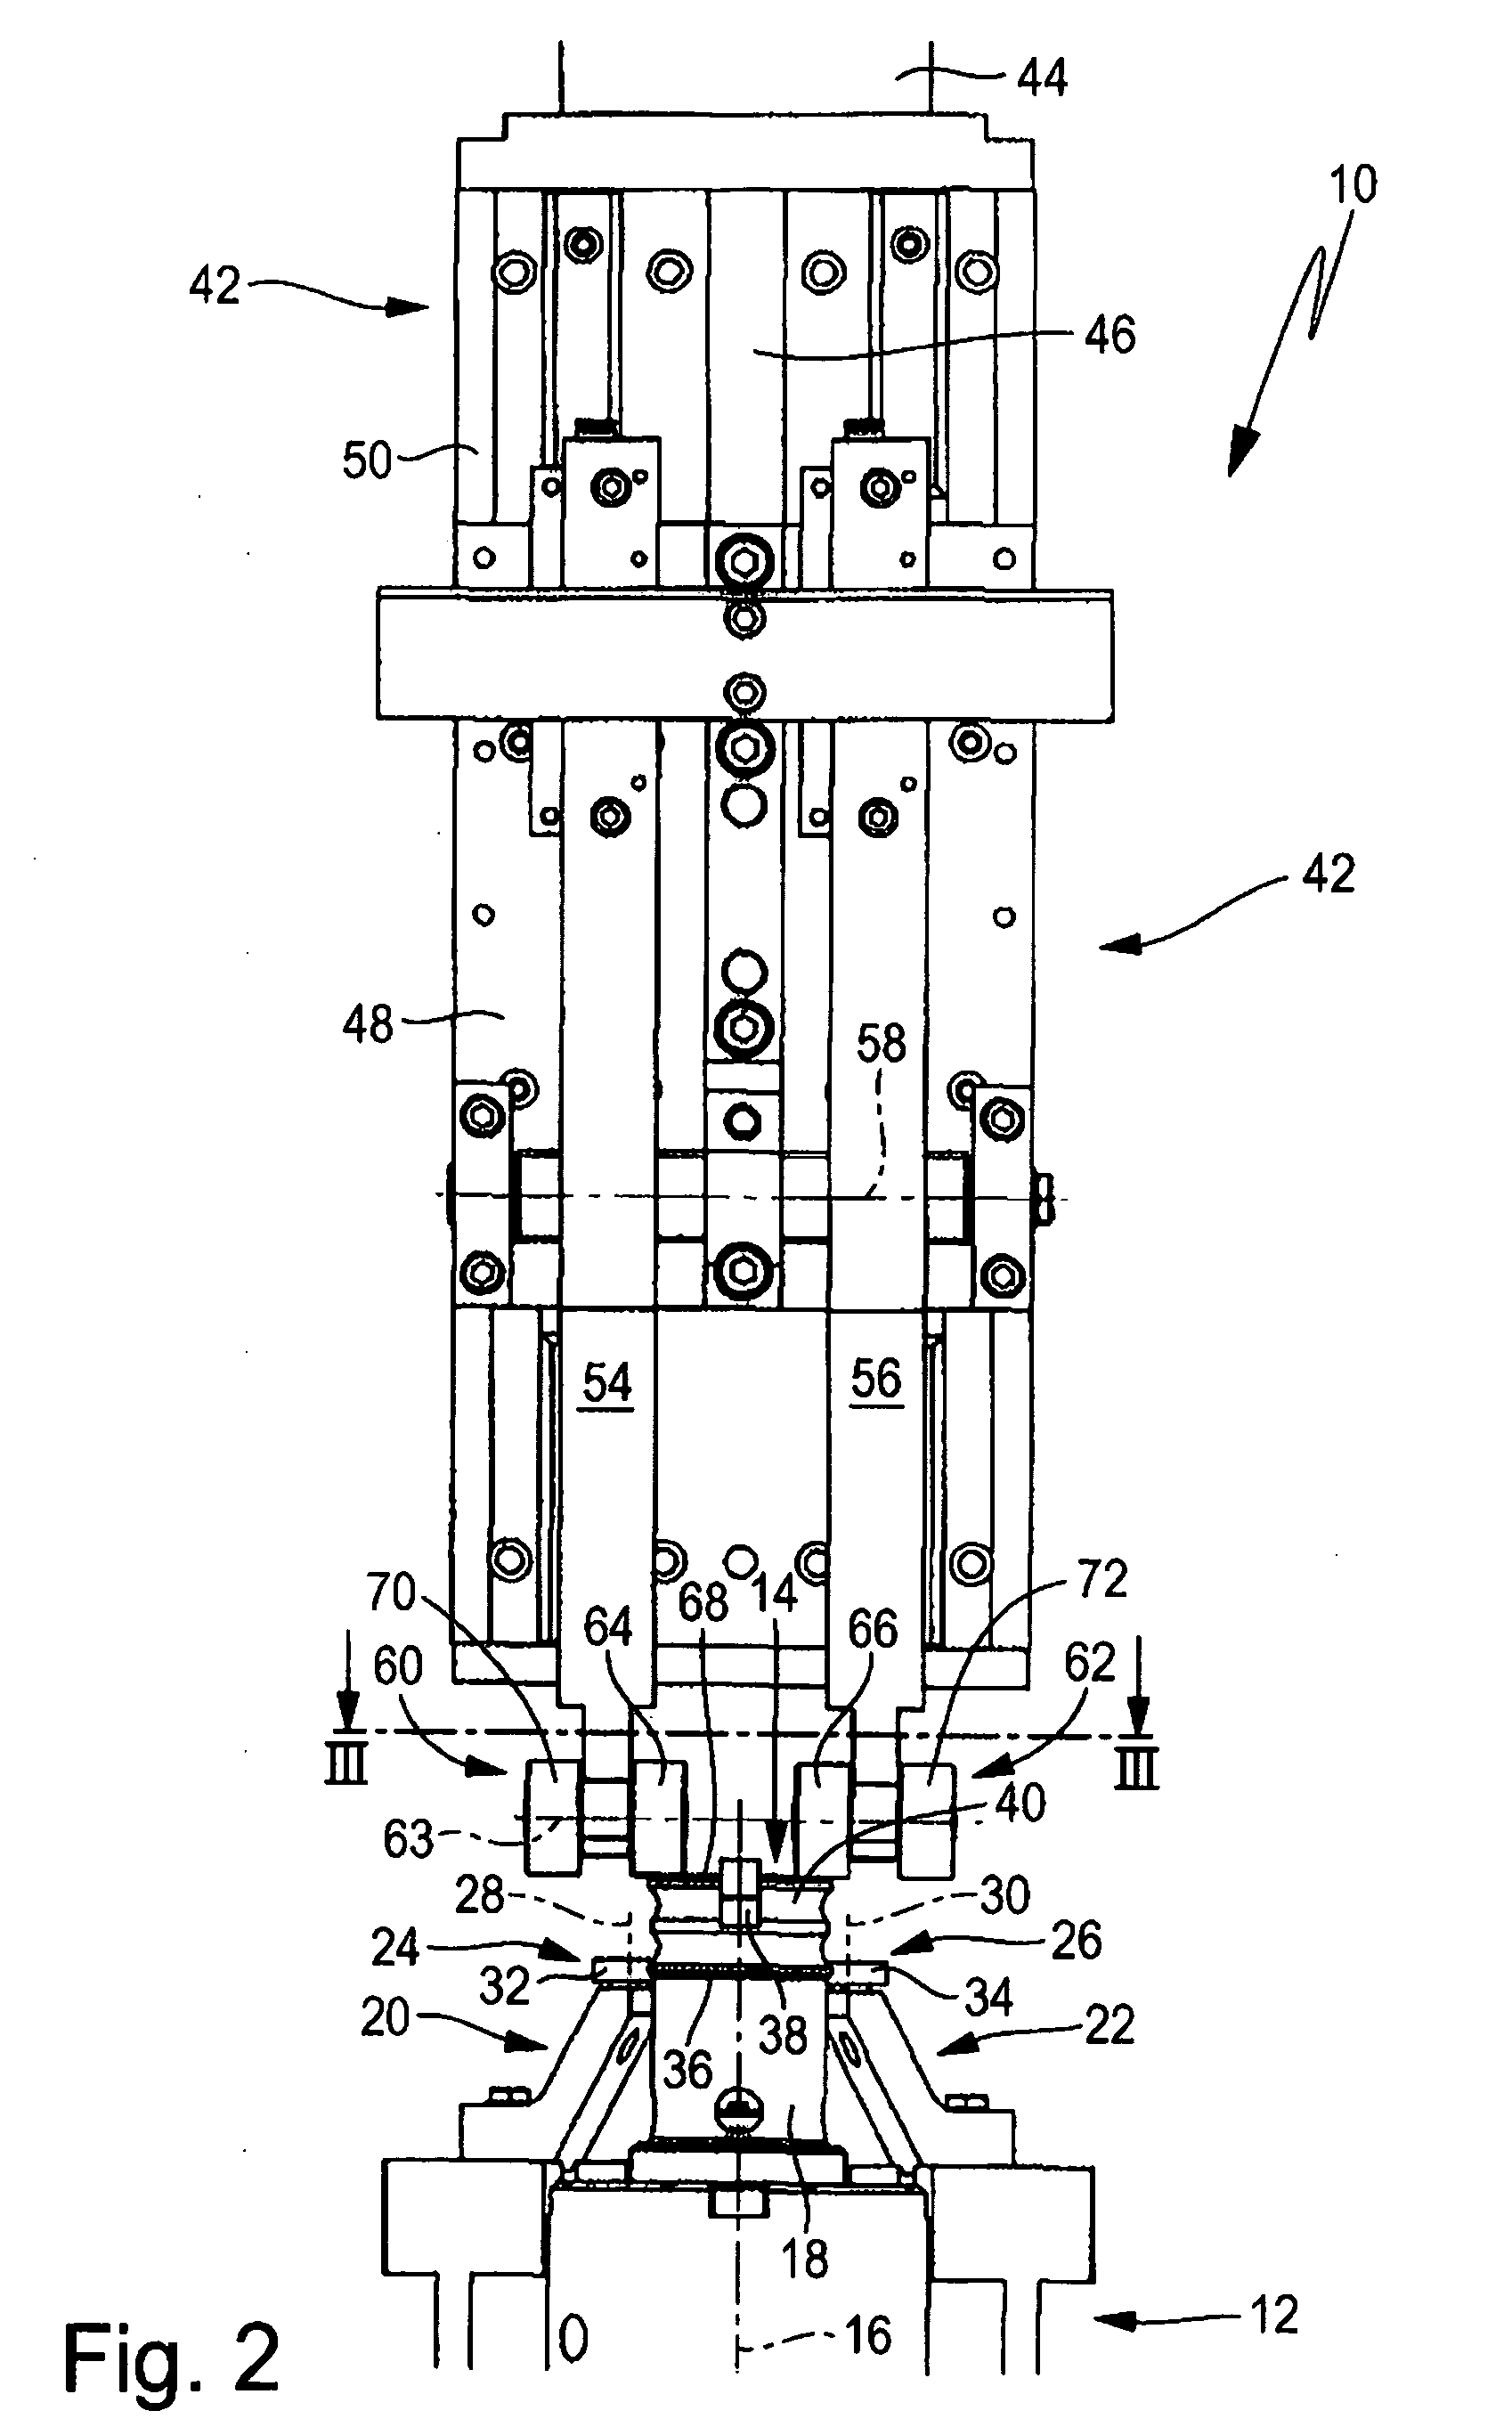 Device and method for fine or finest processing of a rotationally symmetric work piece surface